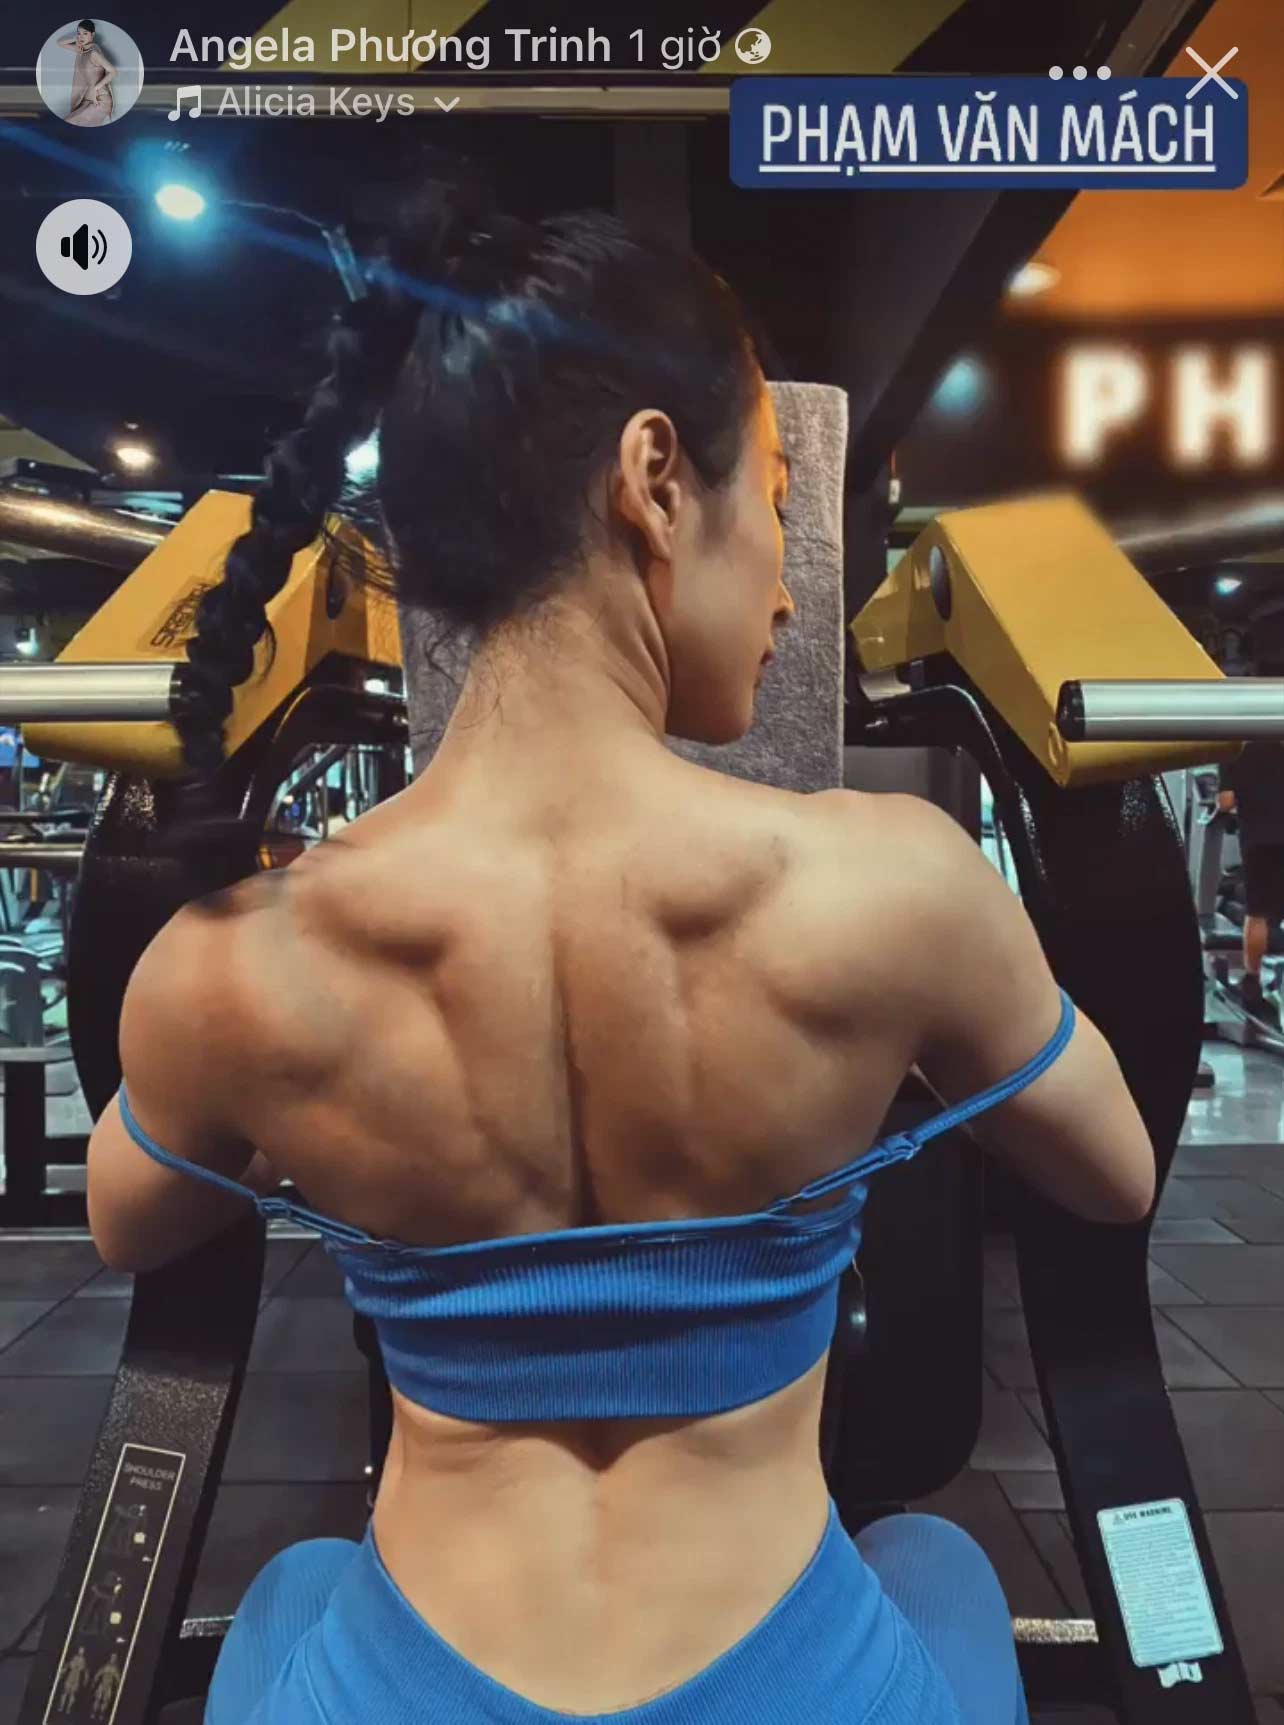 Angela Phuong Trinh lifts weights of nearly 300 kg, her muscular muscles make men " completely out of their mind"  - 3